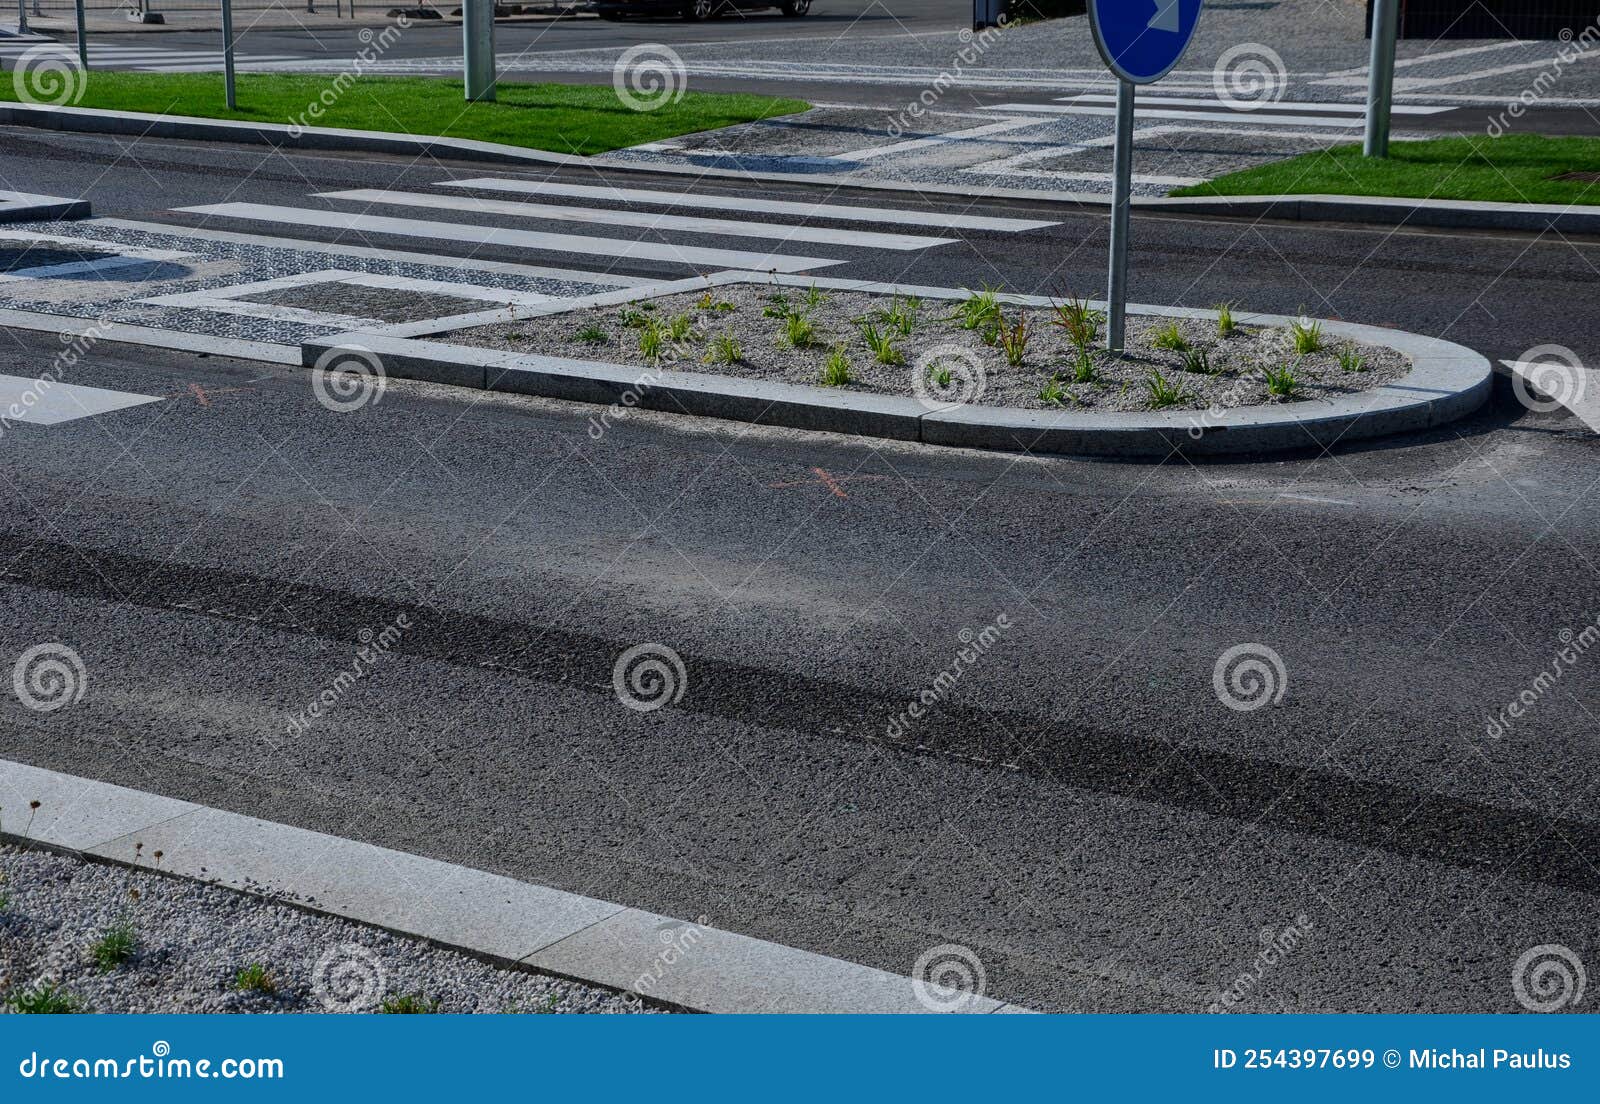 Pedestrian Crossing with Dividing Island between Lanes. Stock Image ...